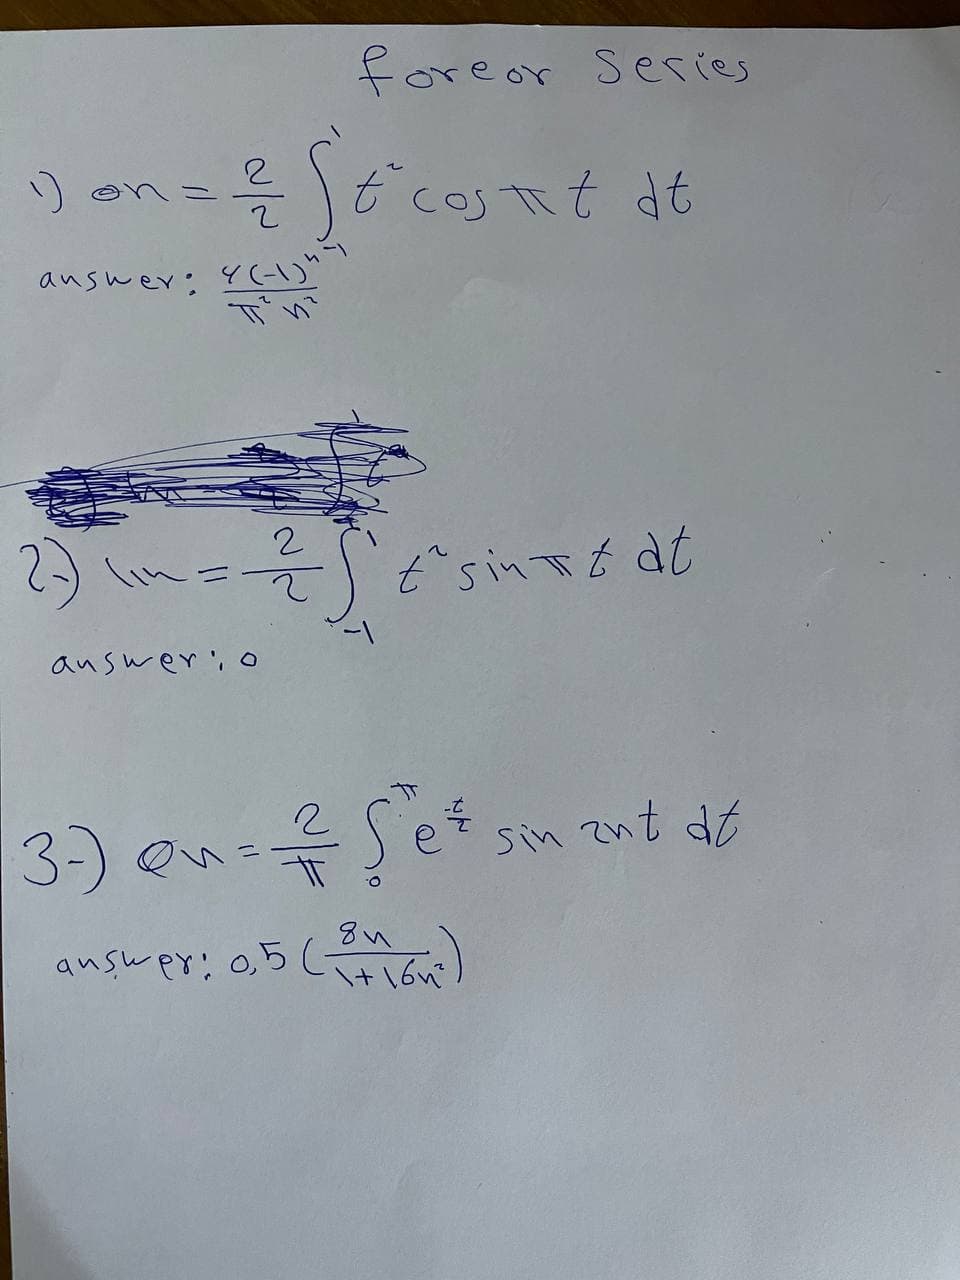 foreor series
cos tit dt
こ
answer: 4(-1)"
23 m=そとsinTtdt
auswer, o
3) e各5etsm
sin znt dt
answer: 0,5Ltion
